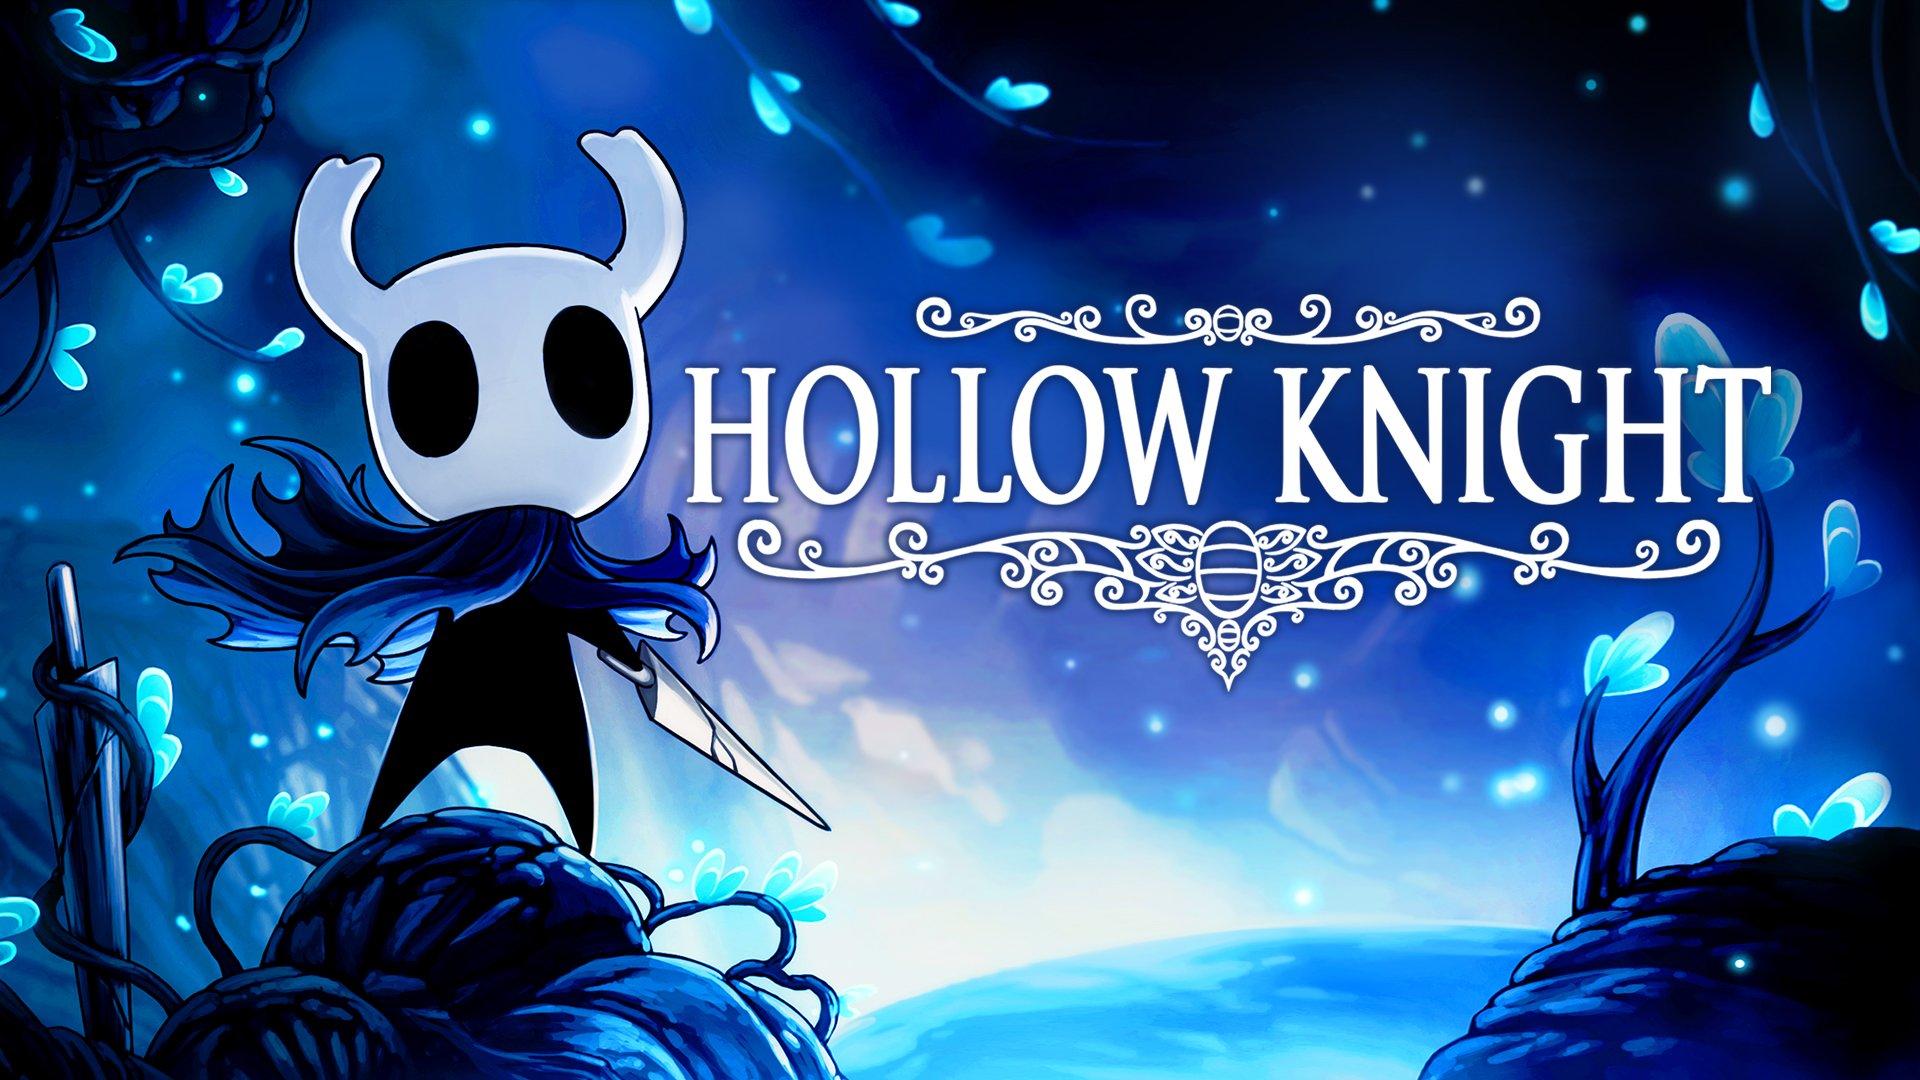 hollow knight nintendo switch physical